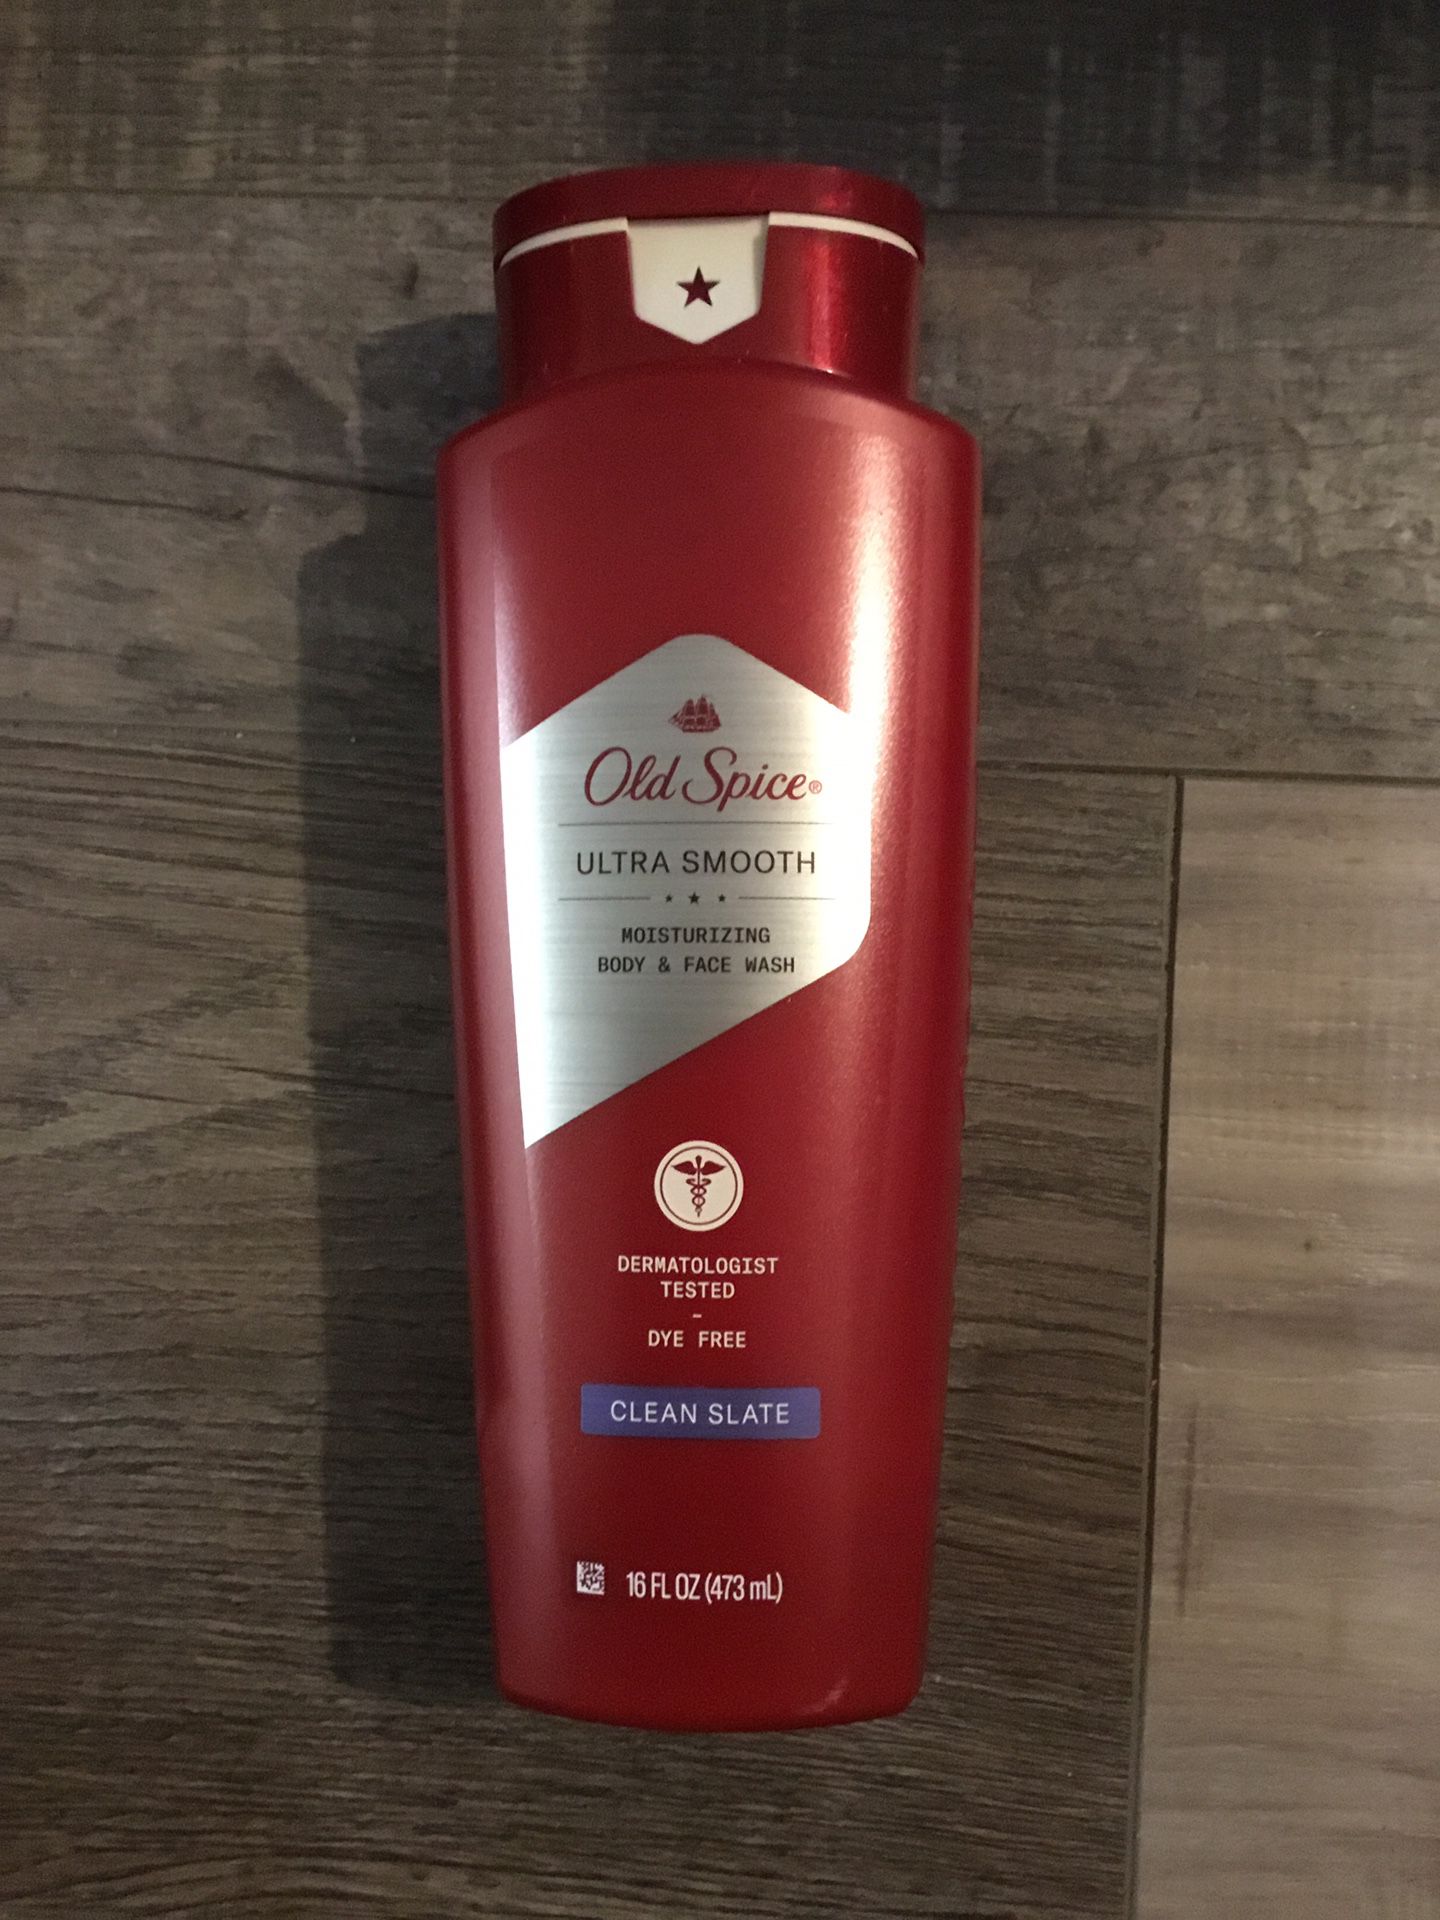 Old spice ultra smooth clean slate body & face wash